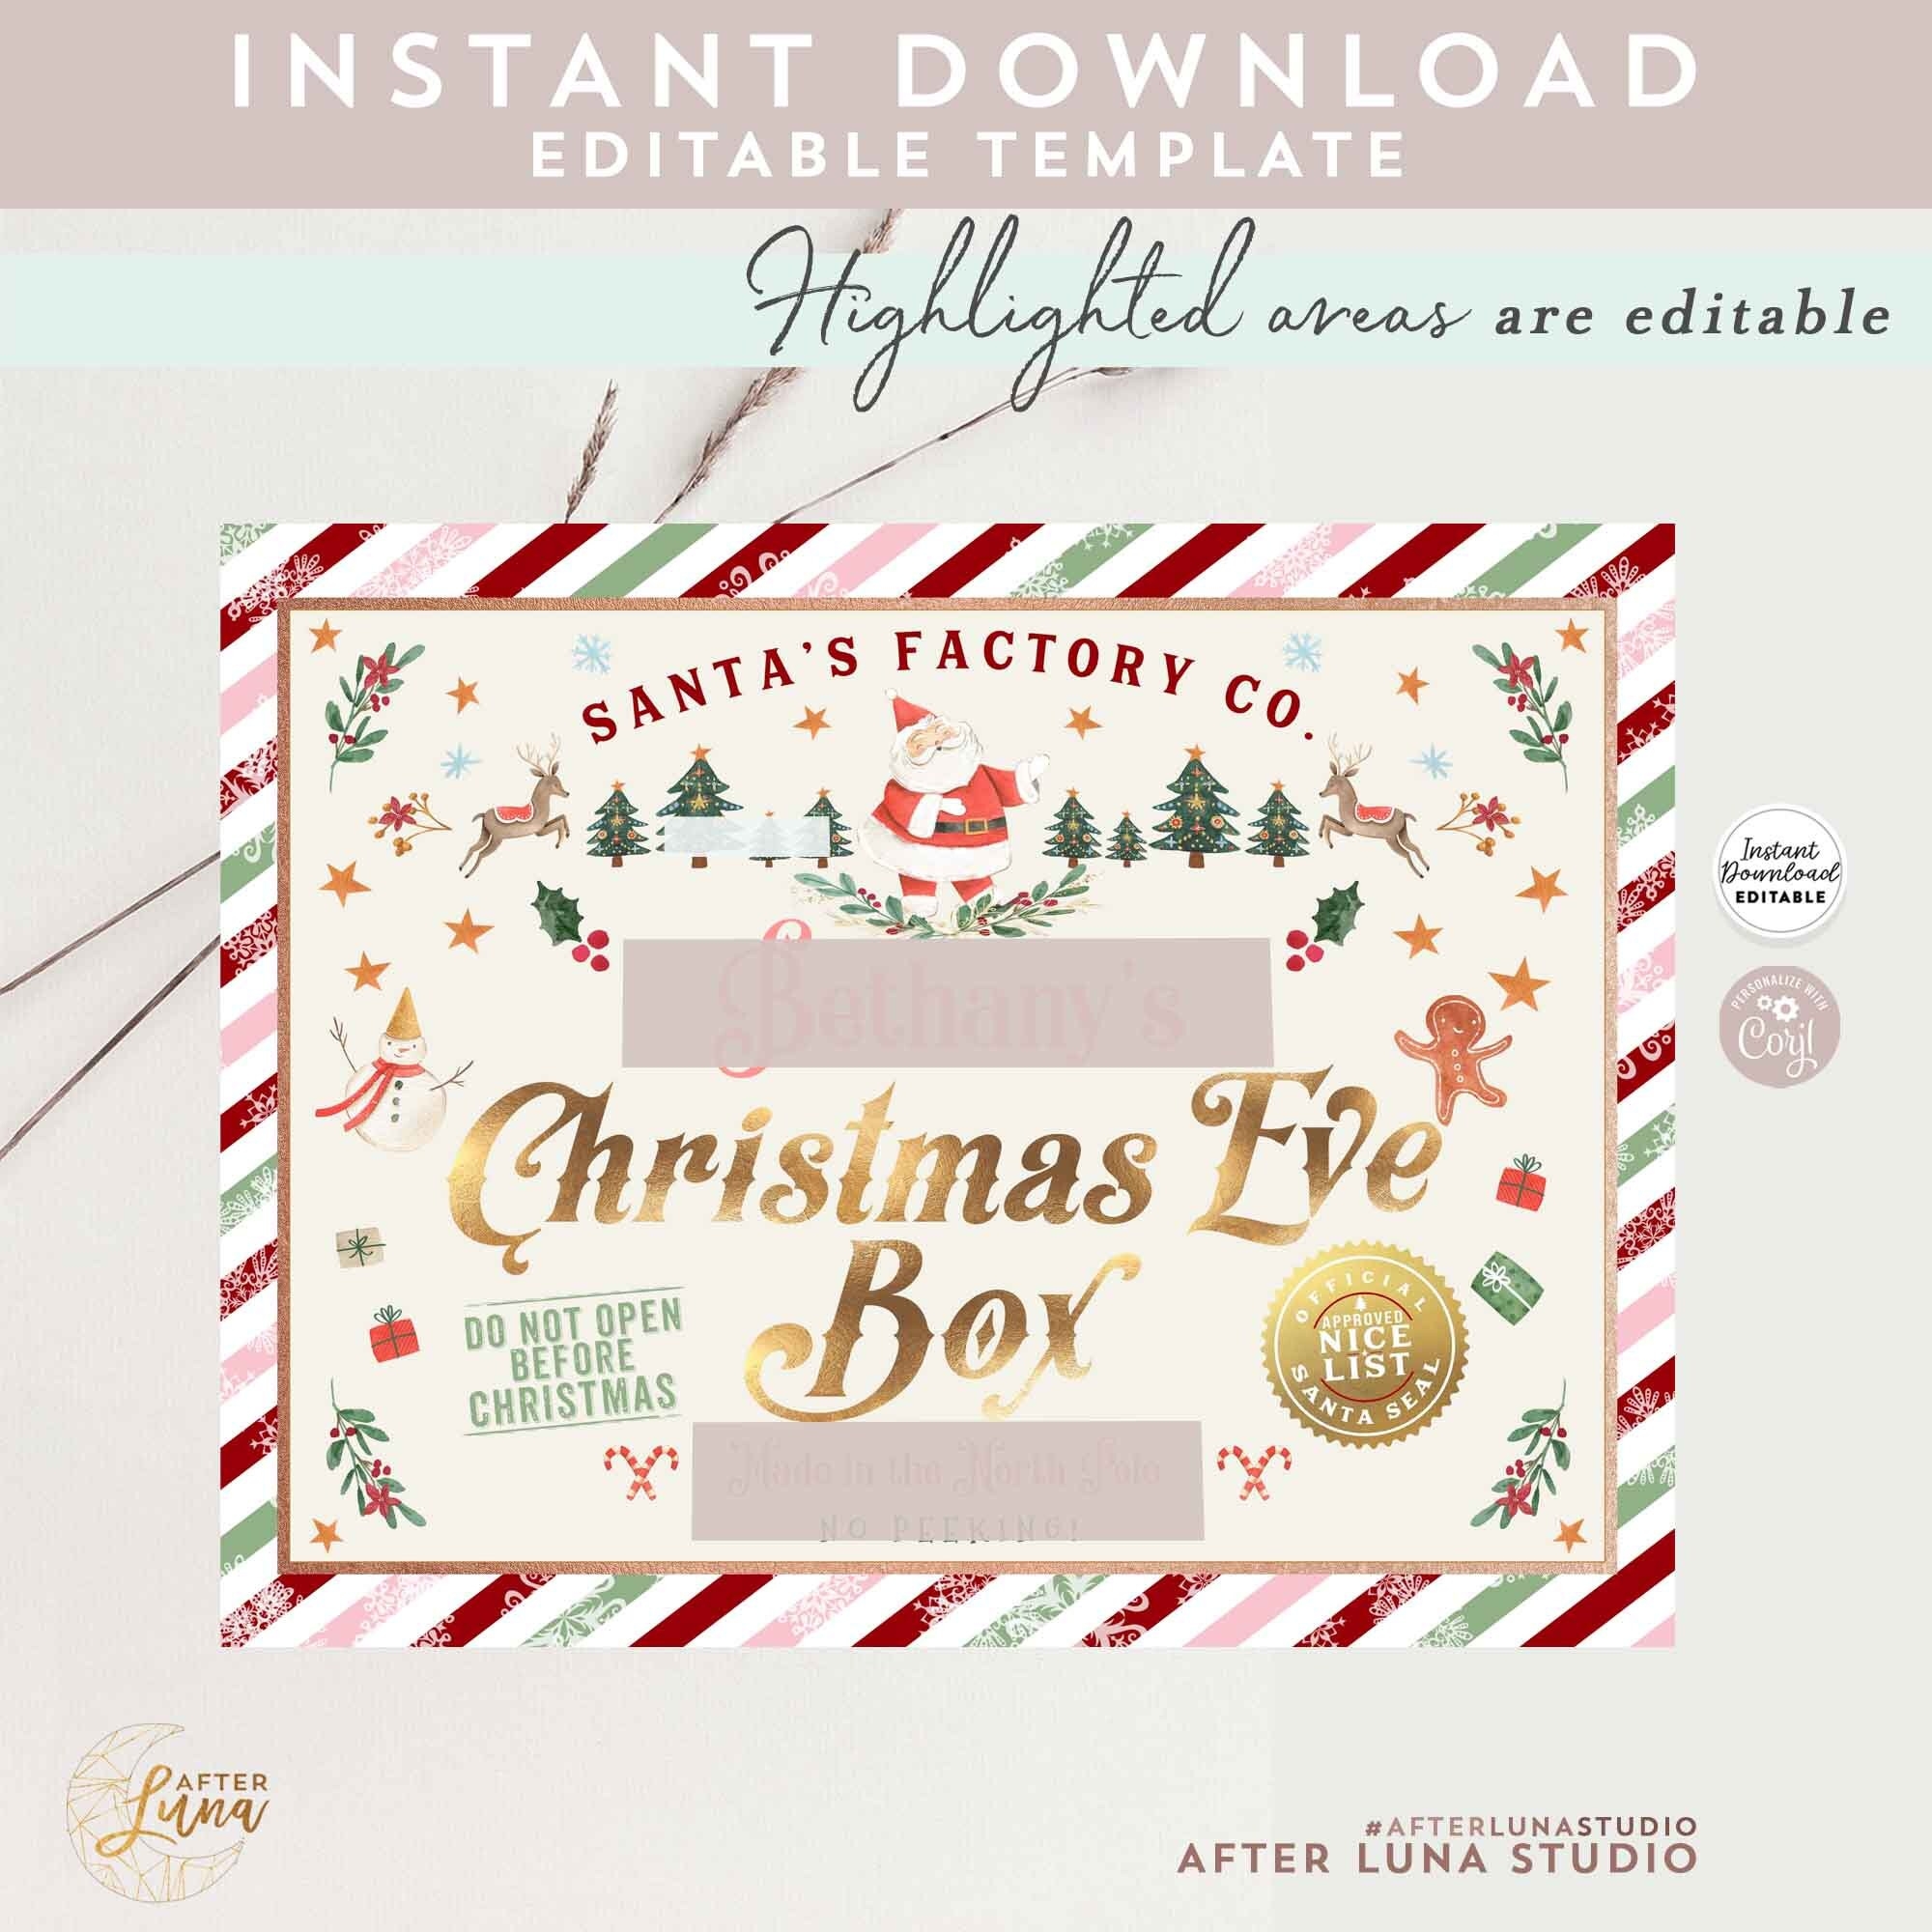 EDITABLE Personalized Pink Christmas Eve Box Label Printable Christmas Eve Traditions Template Digital Printable Instant Download 215 3 Etsy